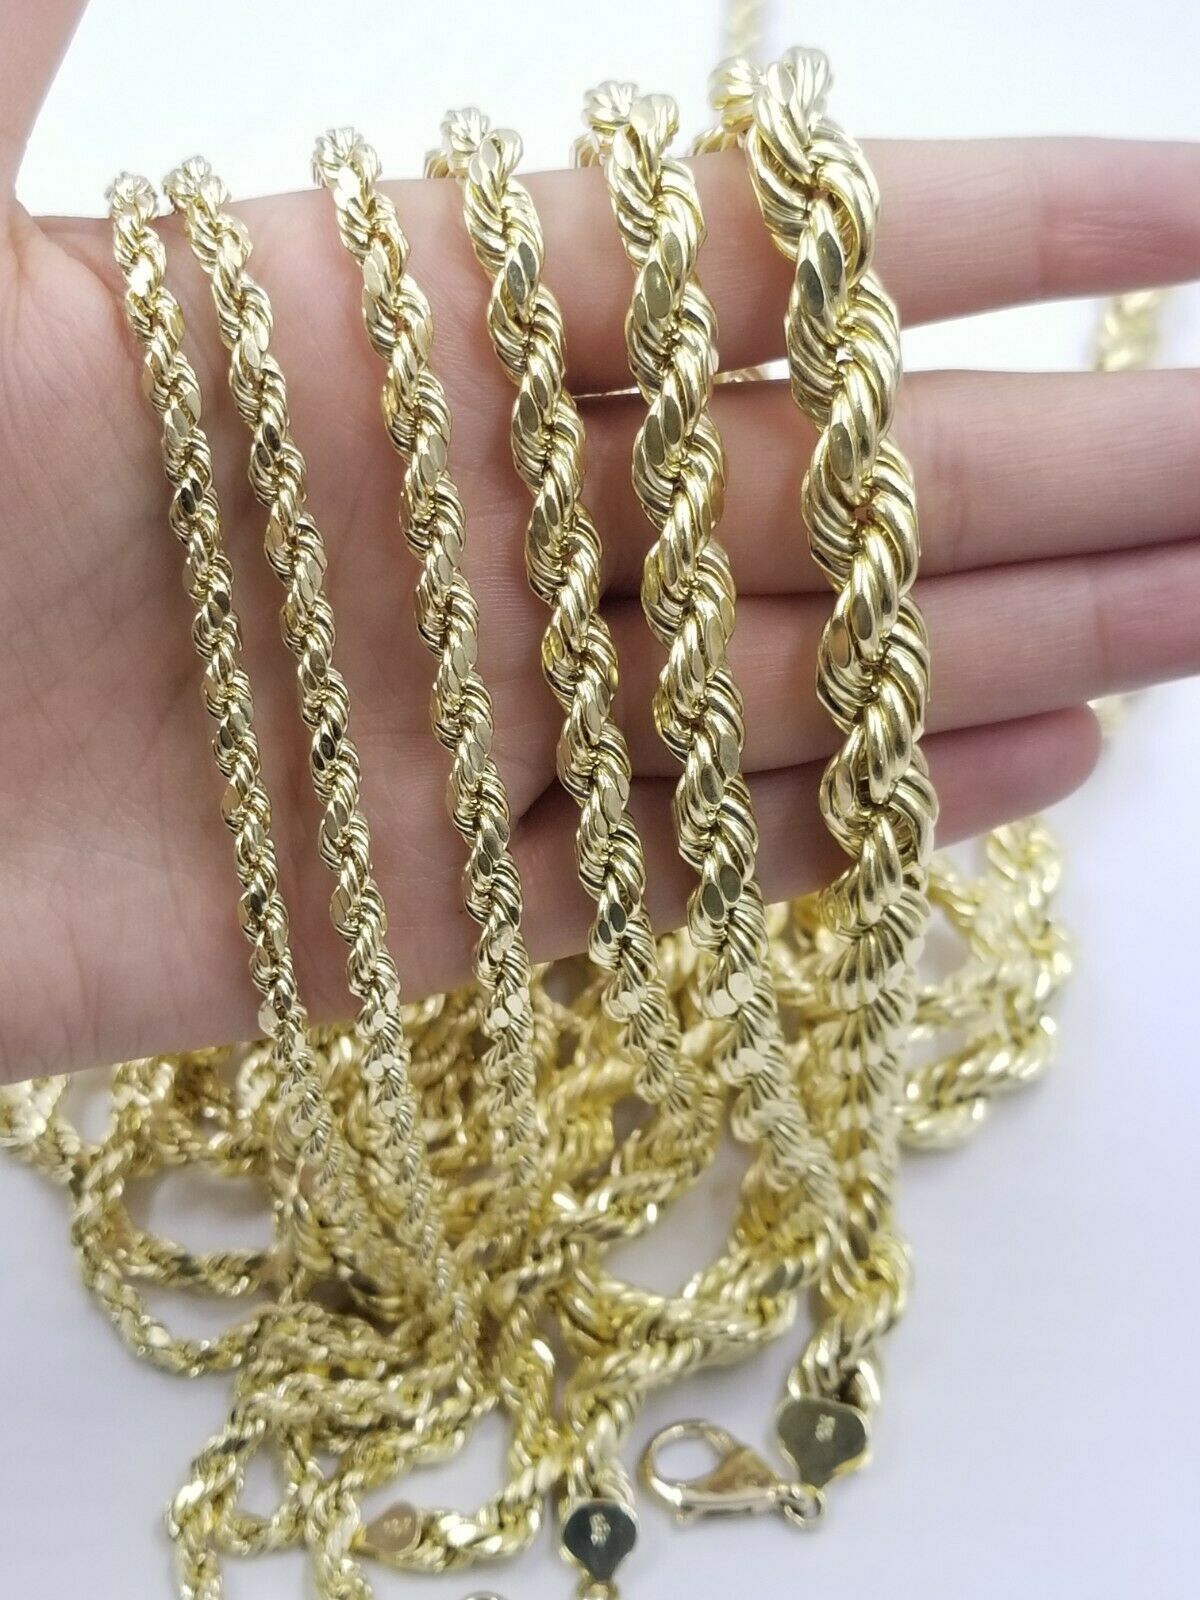 10K White Gold 5mm Rope Chain Necklace 5mm / 28 Inches